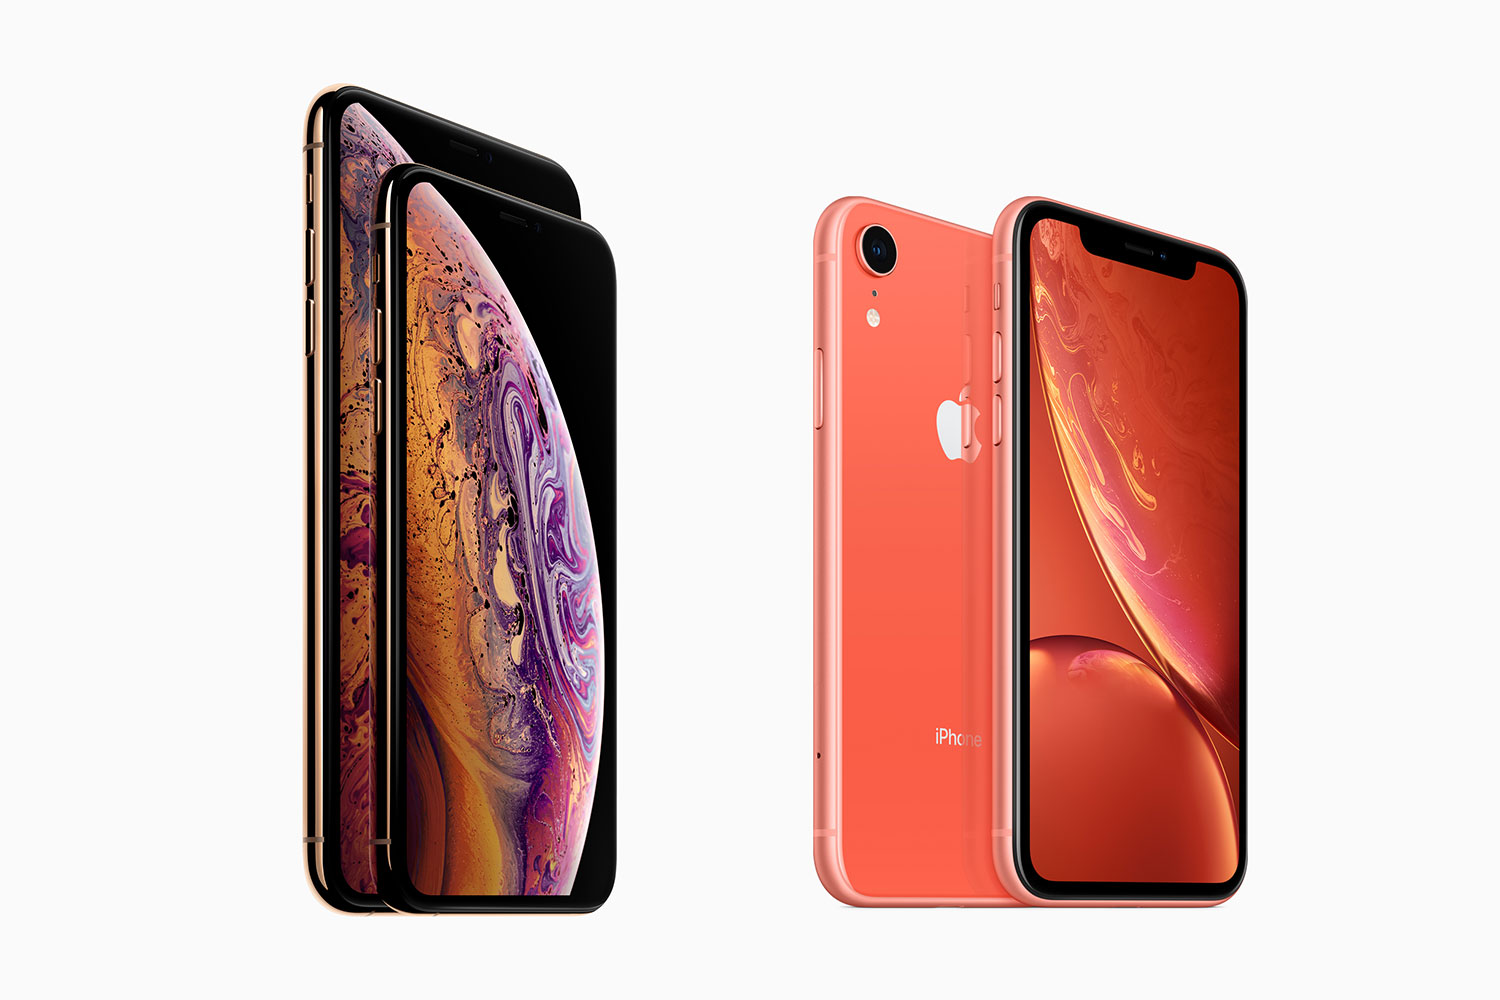 Apple iPhone Xs, Xs Max, and XR